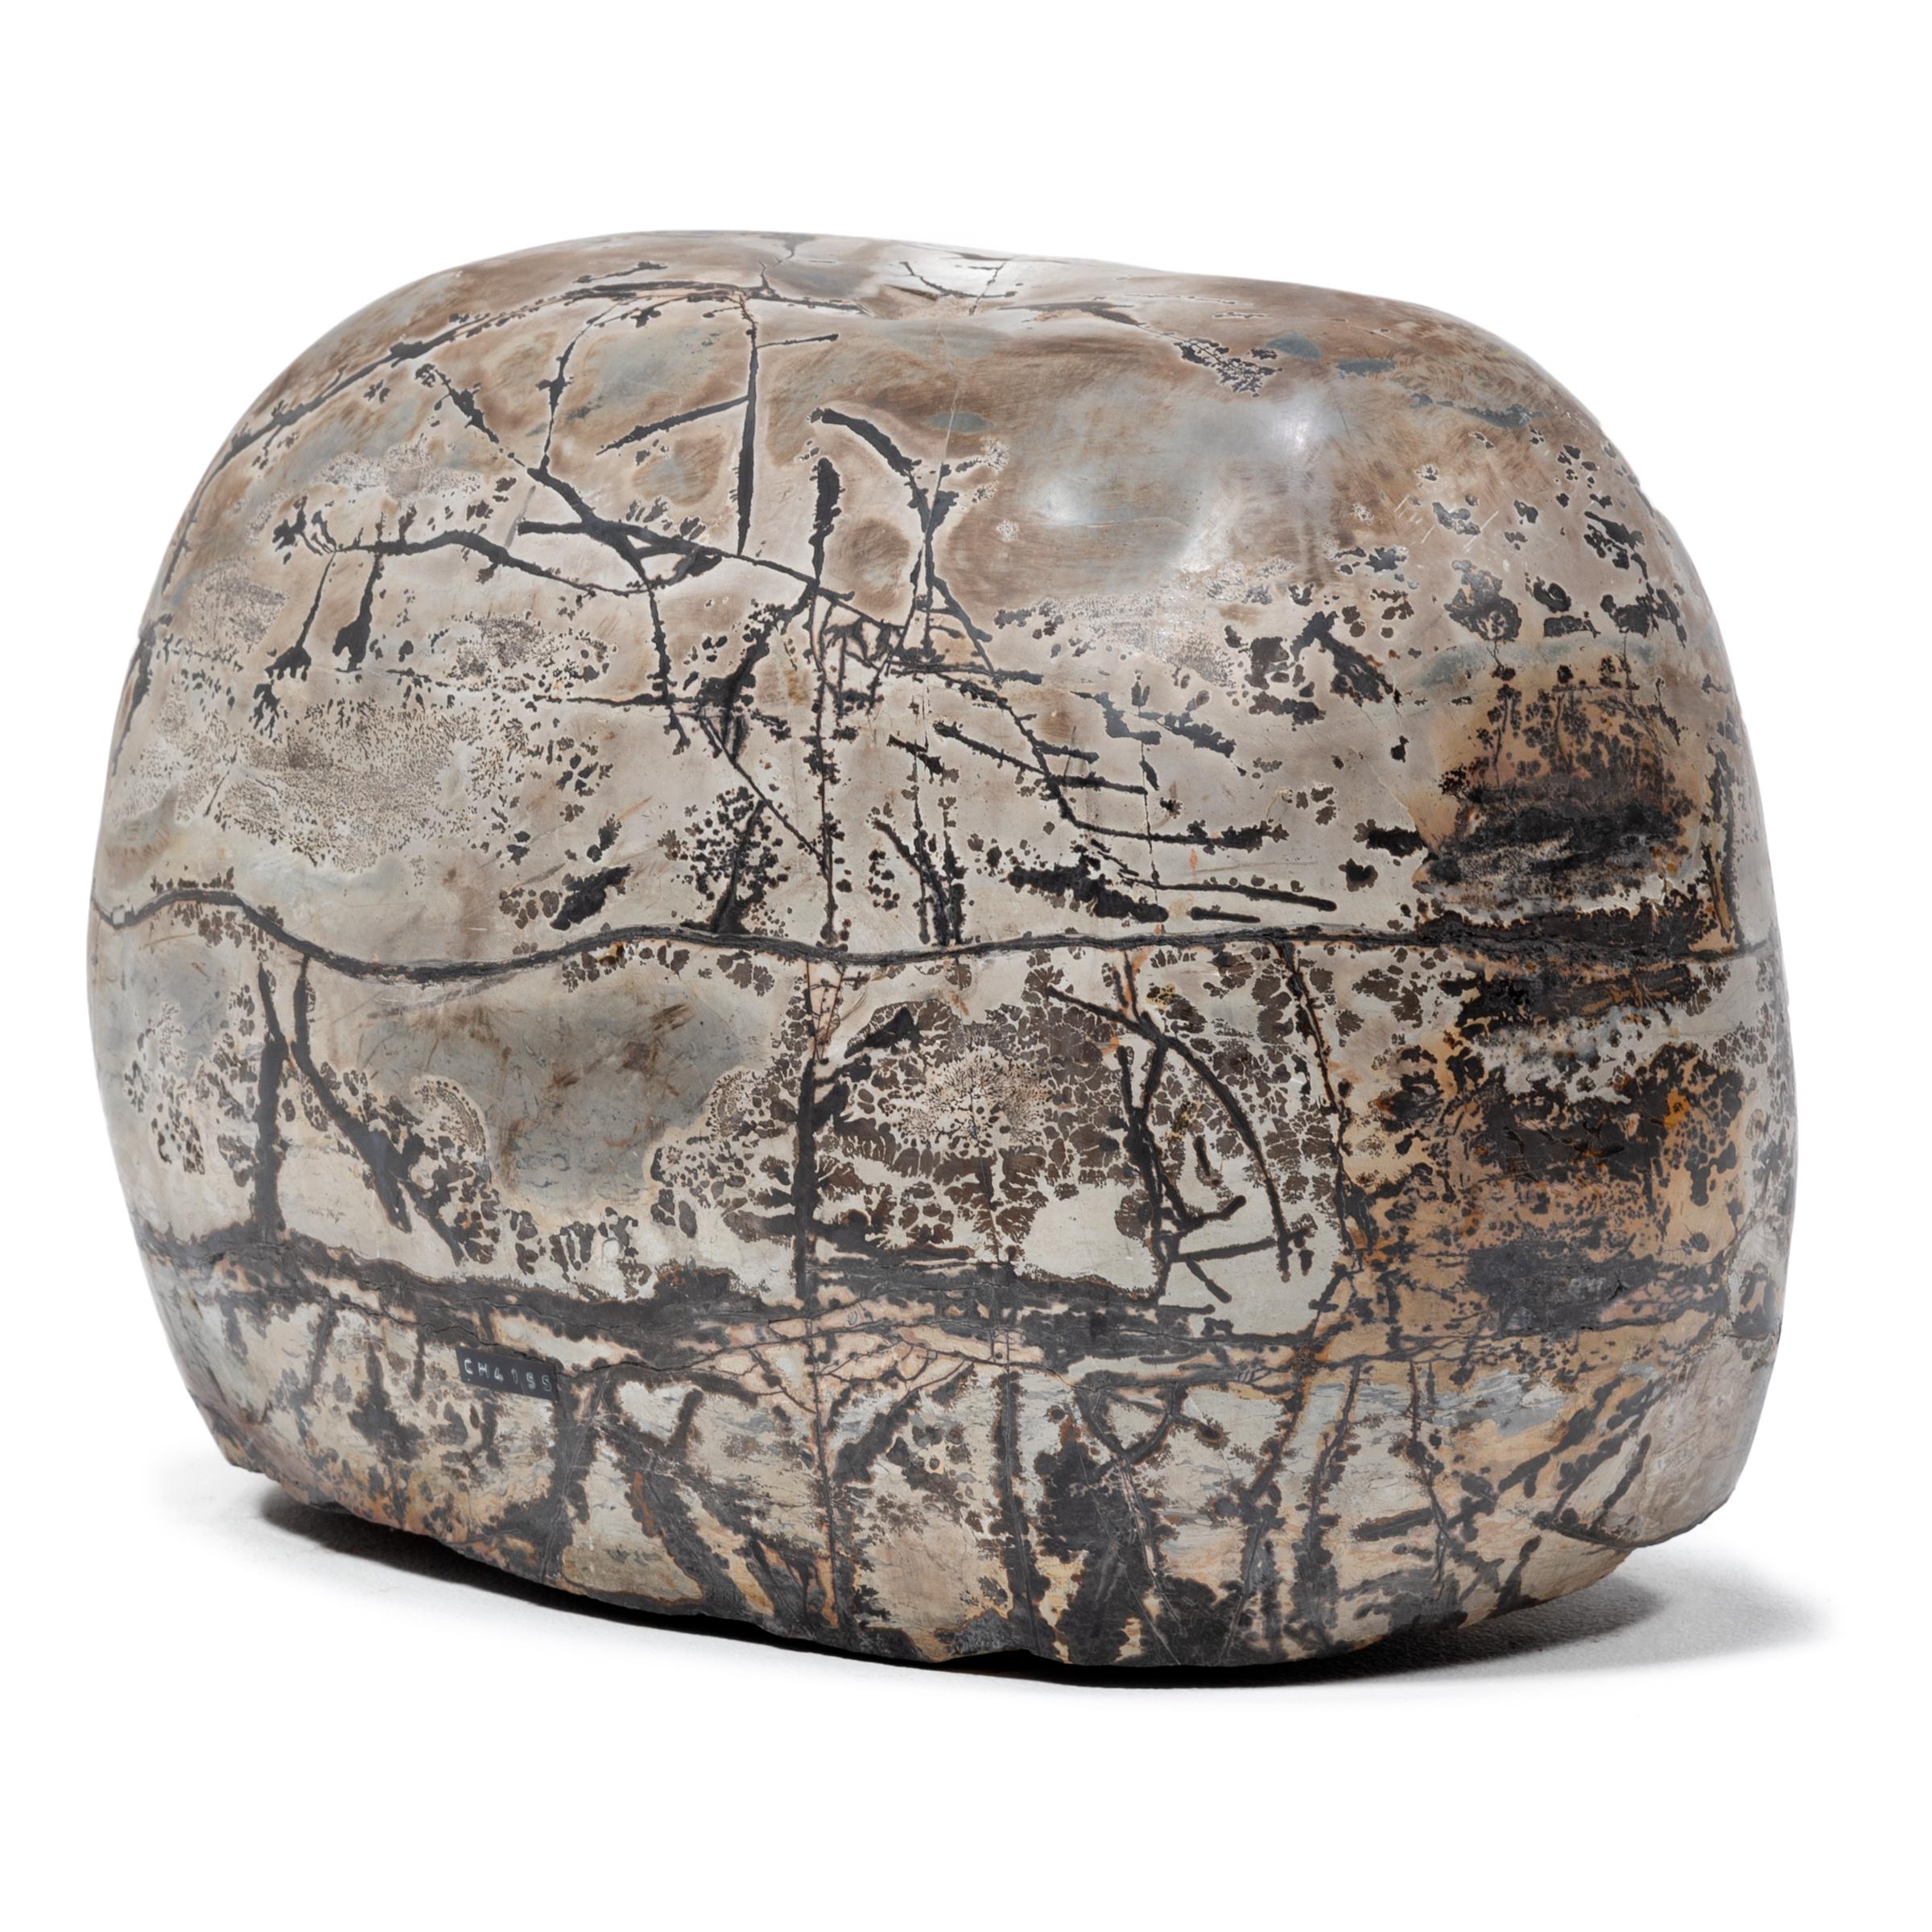 As if brushed with ink and inscribed with intricate calligraphy, this polished painting stone from Guangxi province is marked with swirling patterns of dark and light. To follow the stone's marbled coloring and natural veining can be deeply